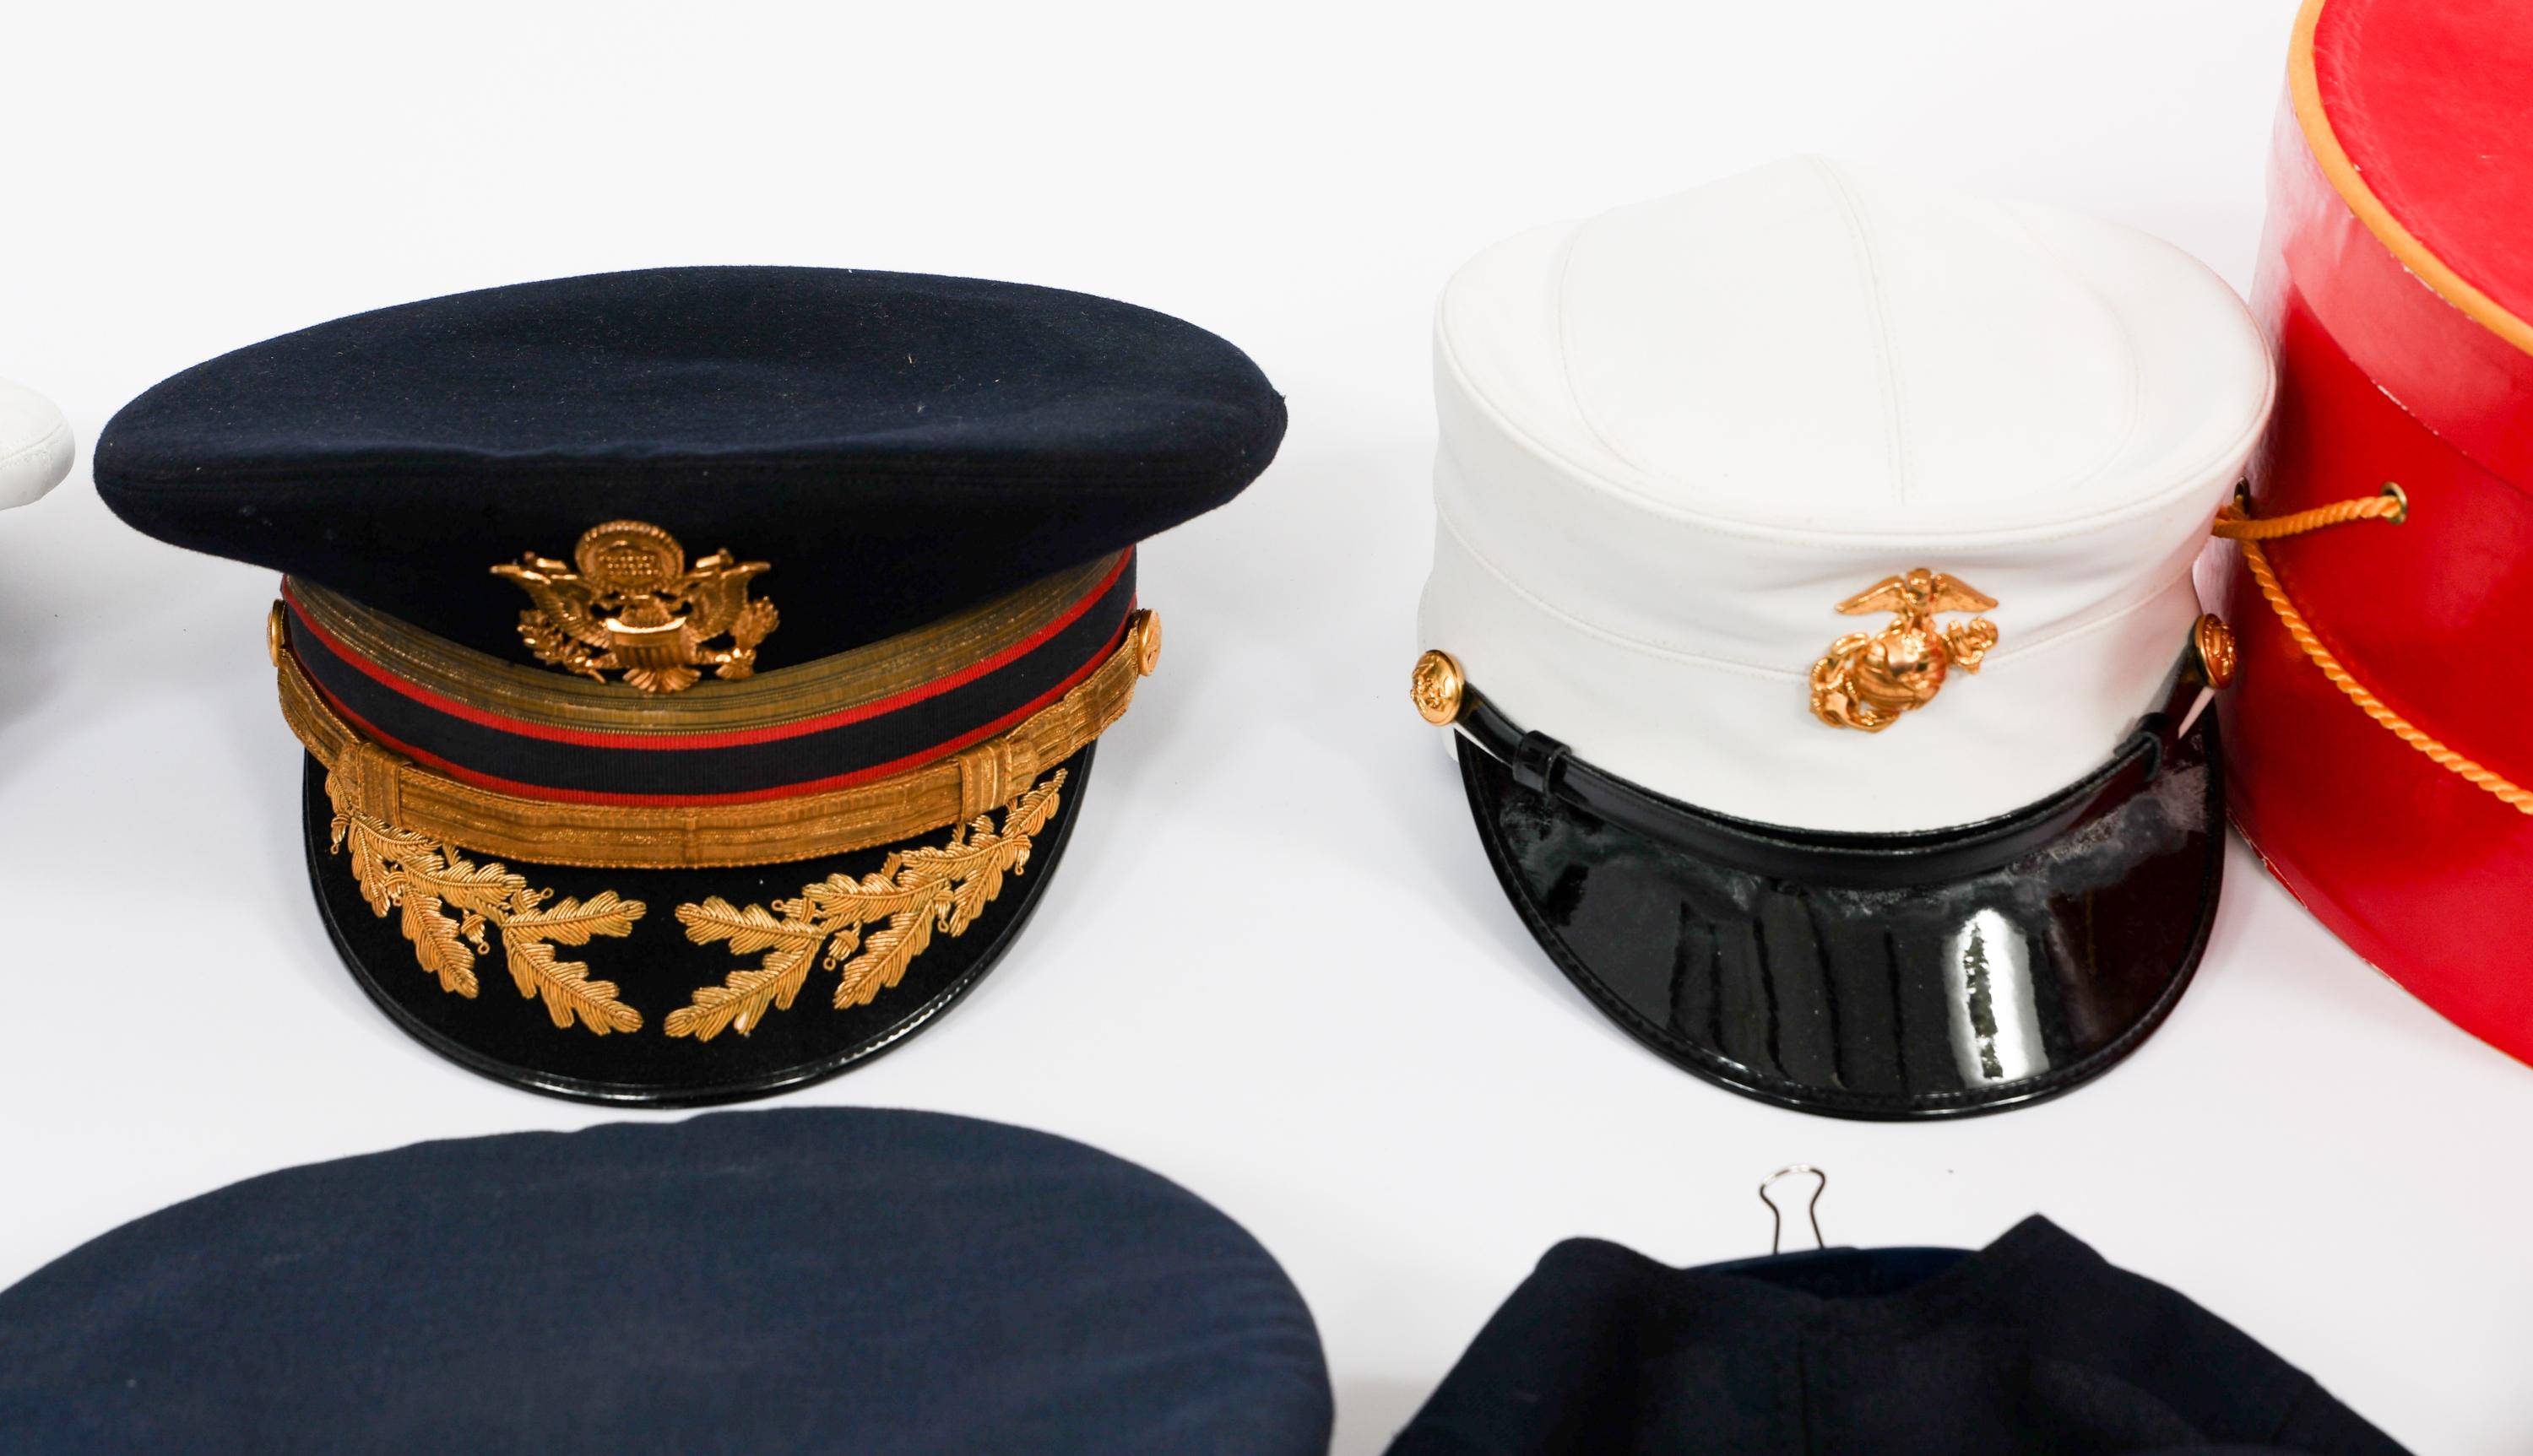 COLD WAR - CURRENT US ARMED FORCES HEADGEAR